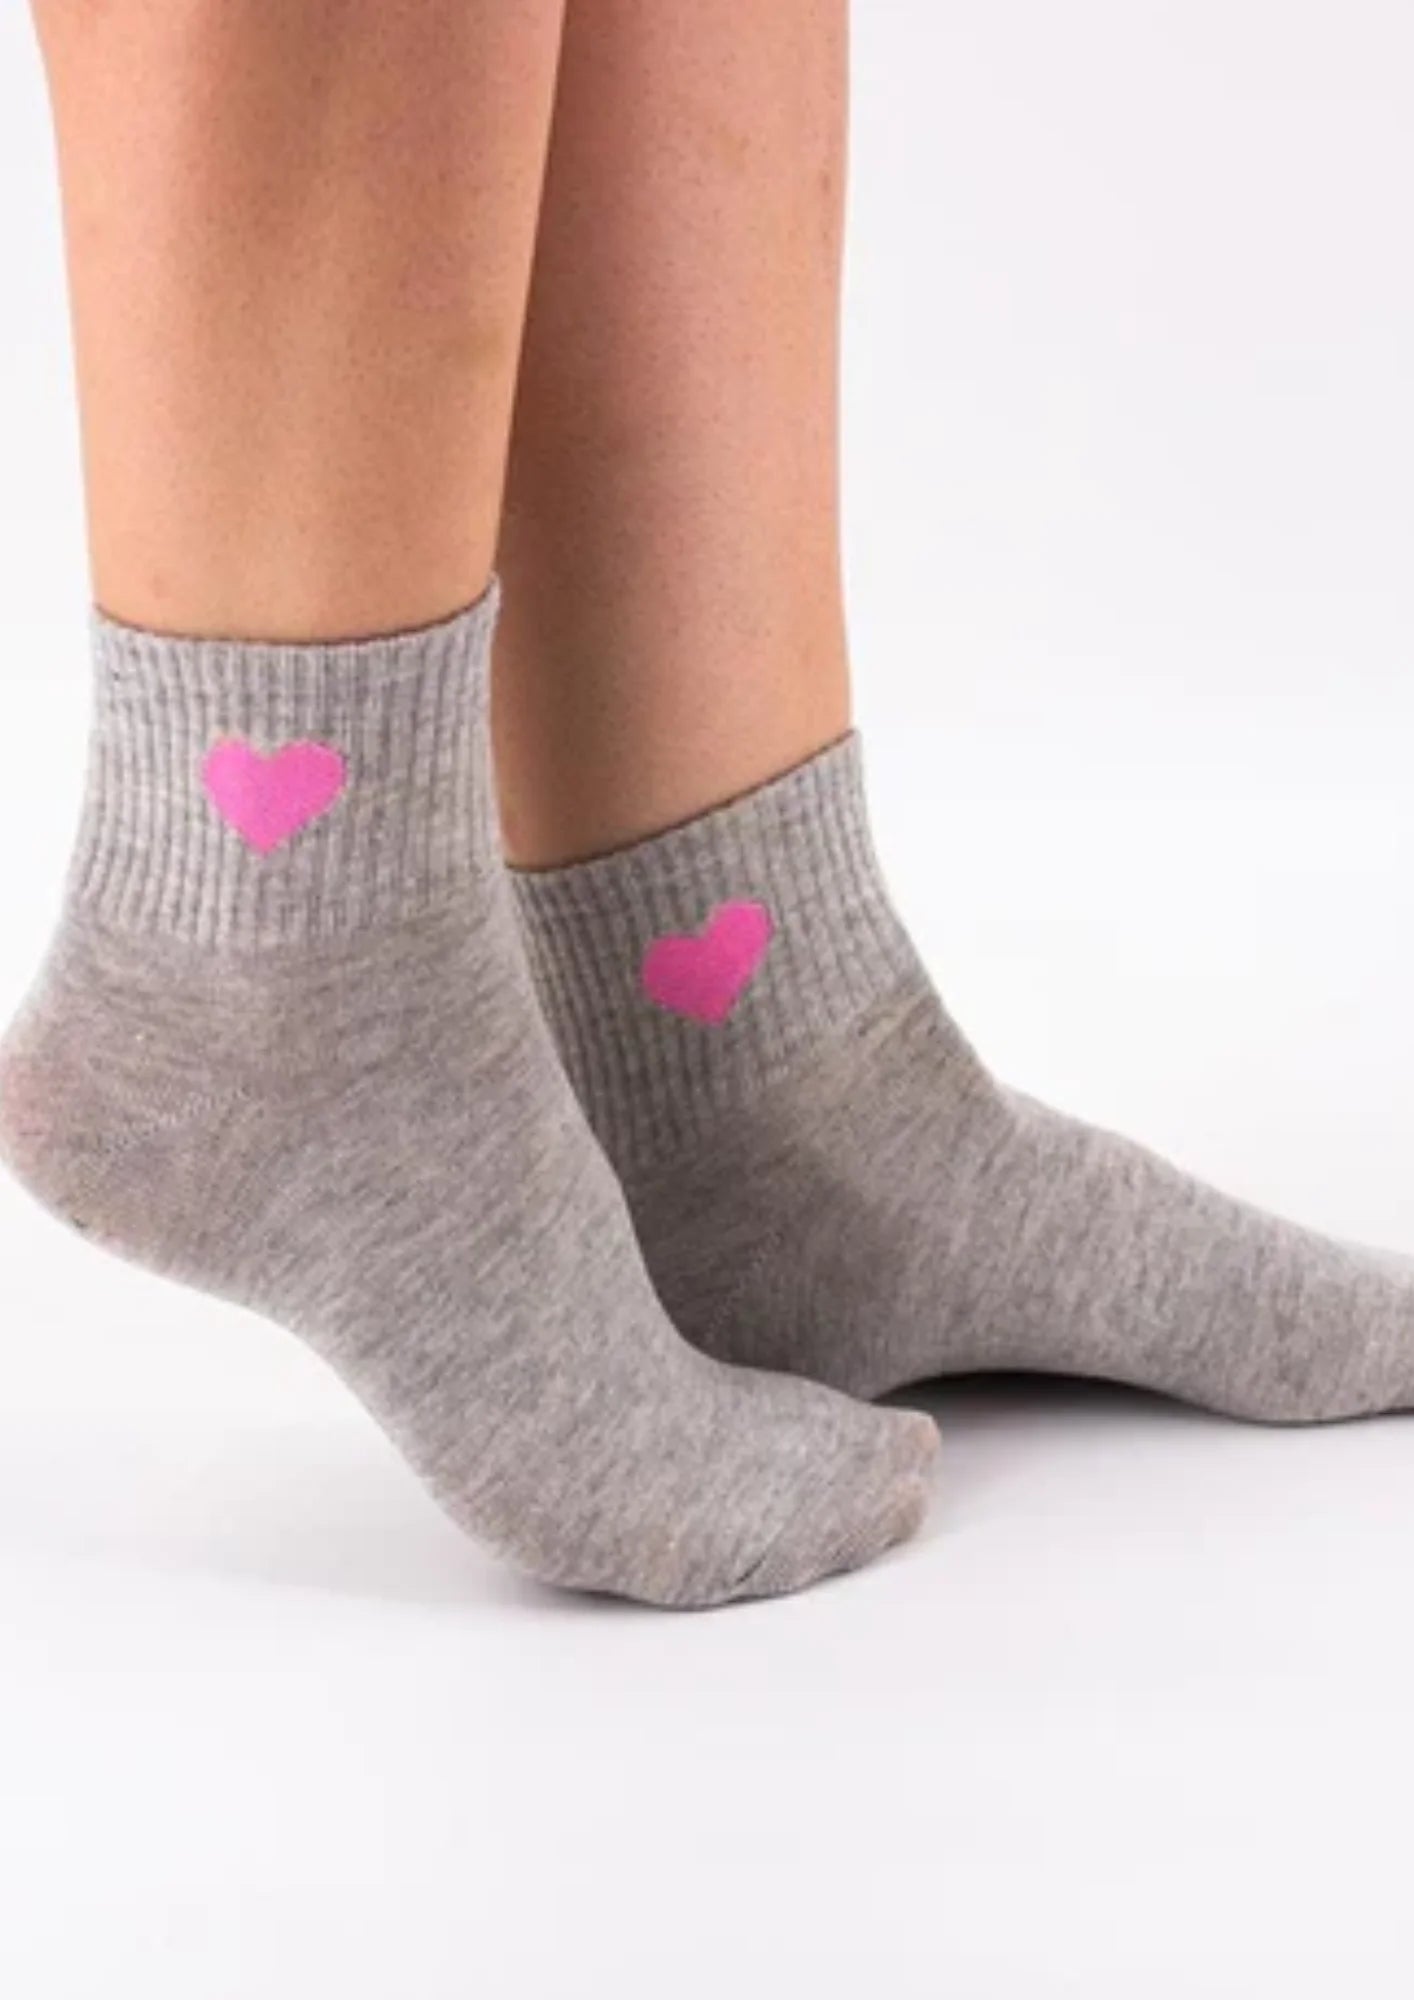 GREY SOCKS WITH RED HEART DETAIL